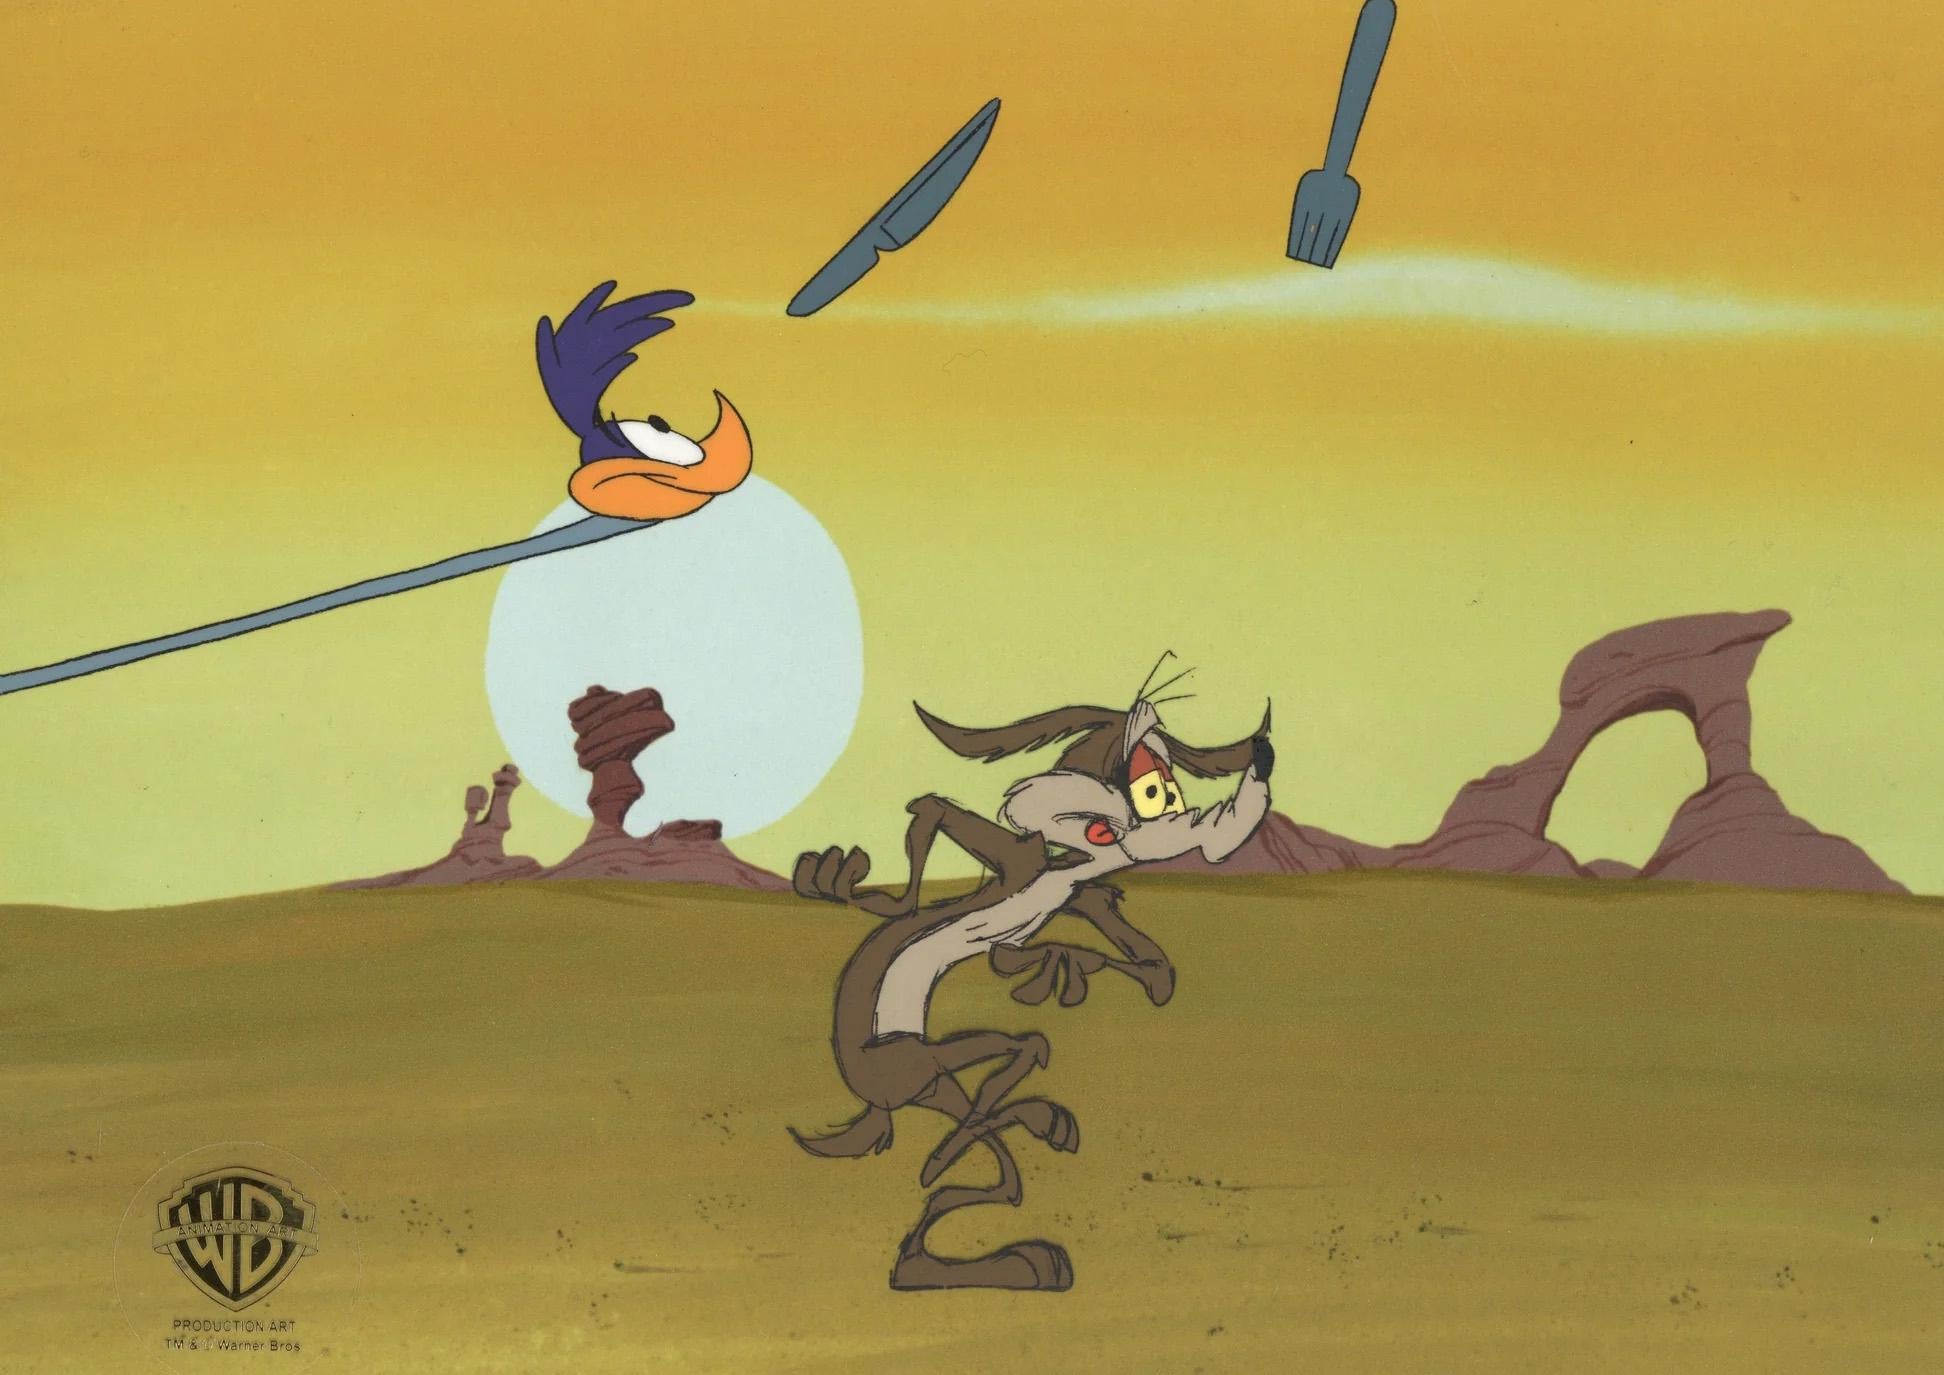 Looney Tunes Original Production Cel: Road Runner and Wile E. Coyote - Art by Warner Bros. Studio Artists